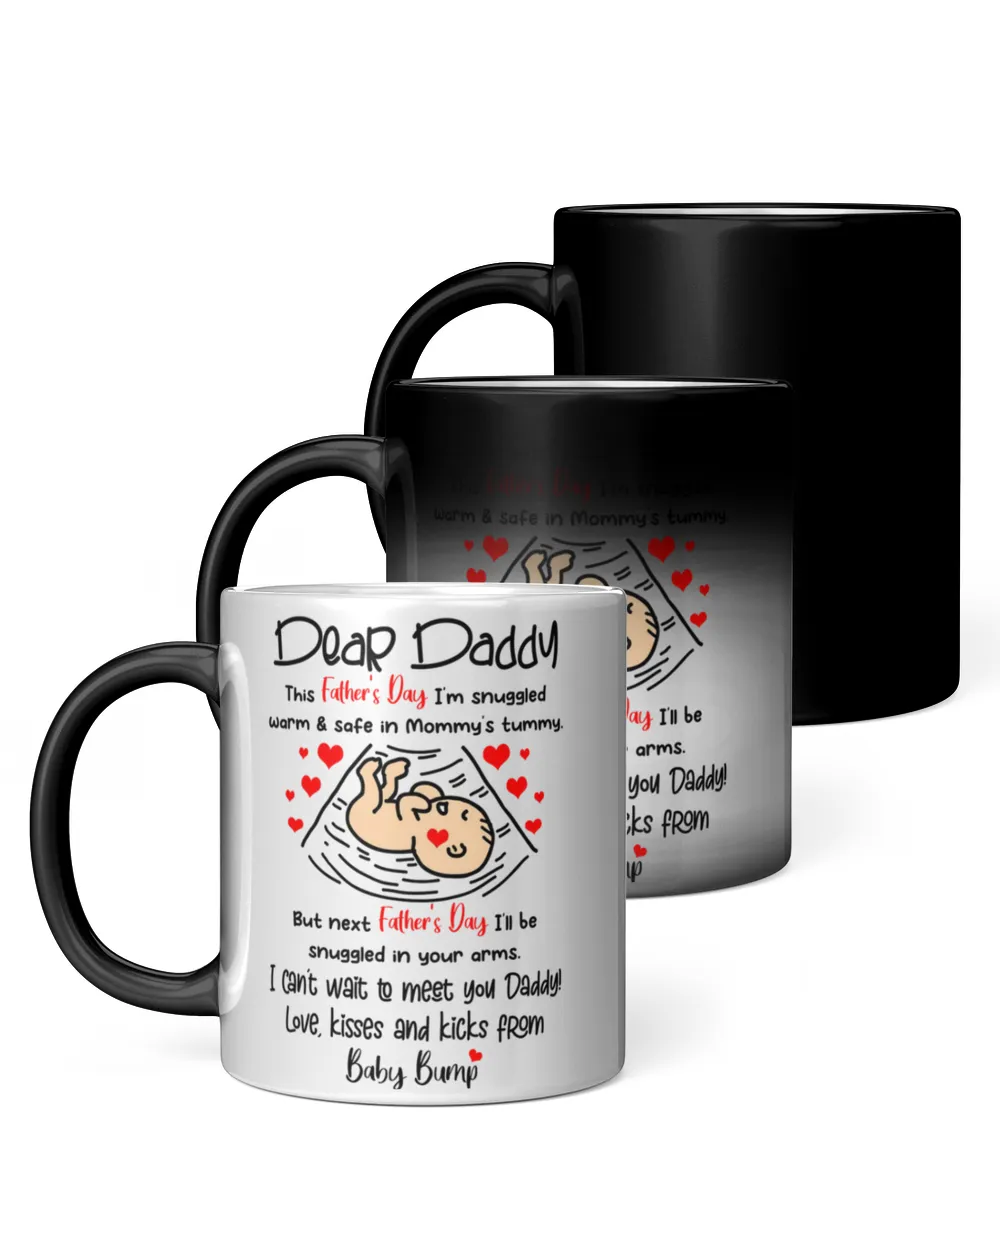 Dear Daddy I Can't Wait To Meet You Father's Day Mug 4